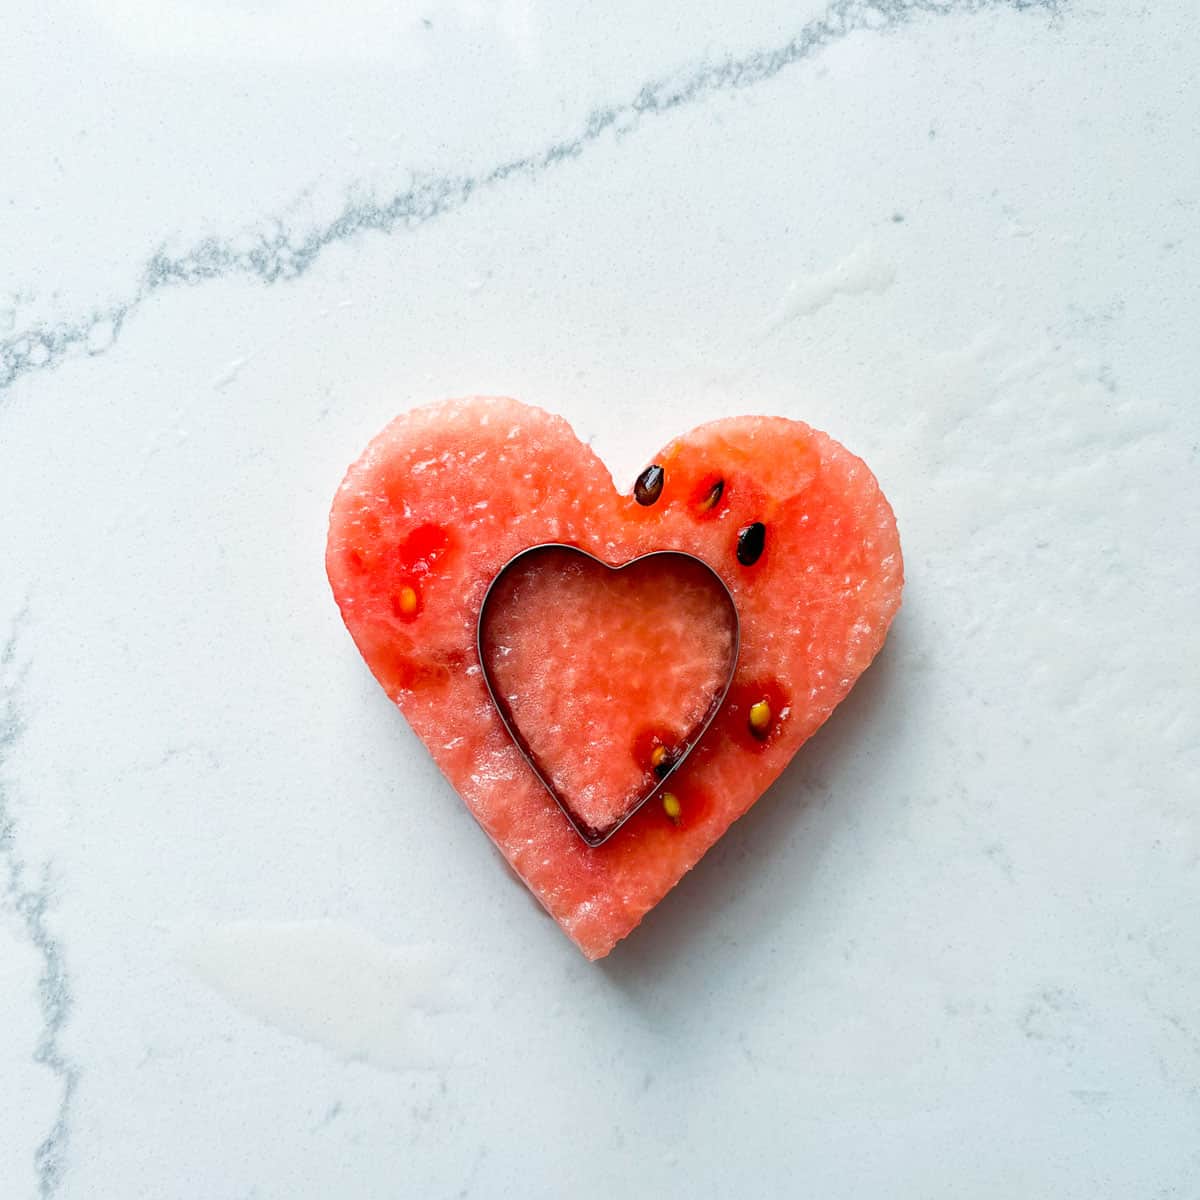 A small heart shaped cookie cutter resting on top of a larger heart shaped piece of watermelon.